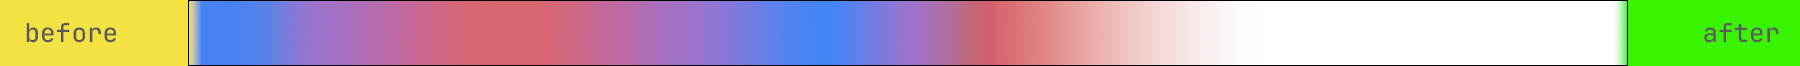 The same gradient as earlier, but now it's yellow on the left ("before") and green on the right ("after") of its colours